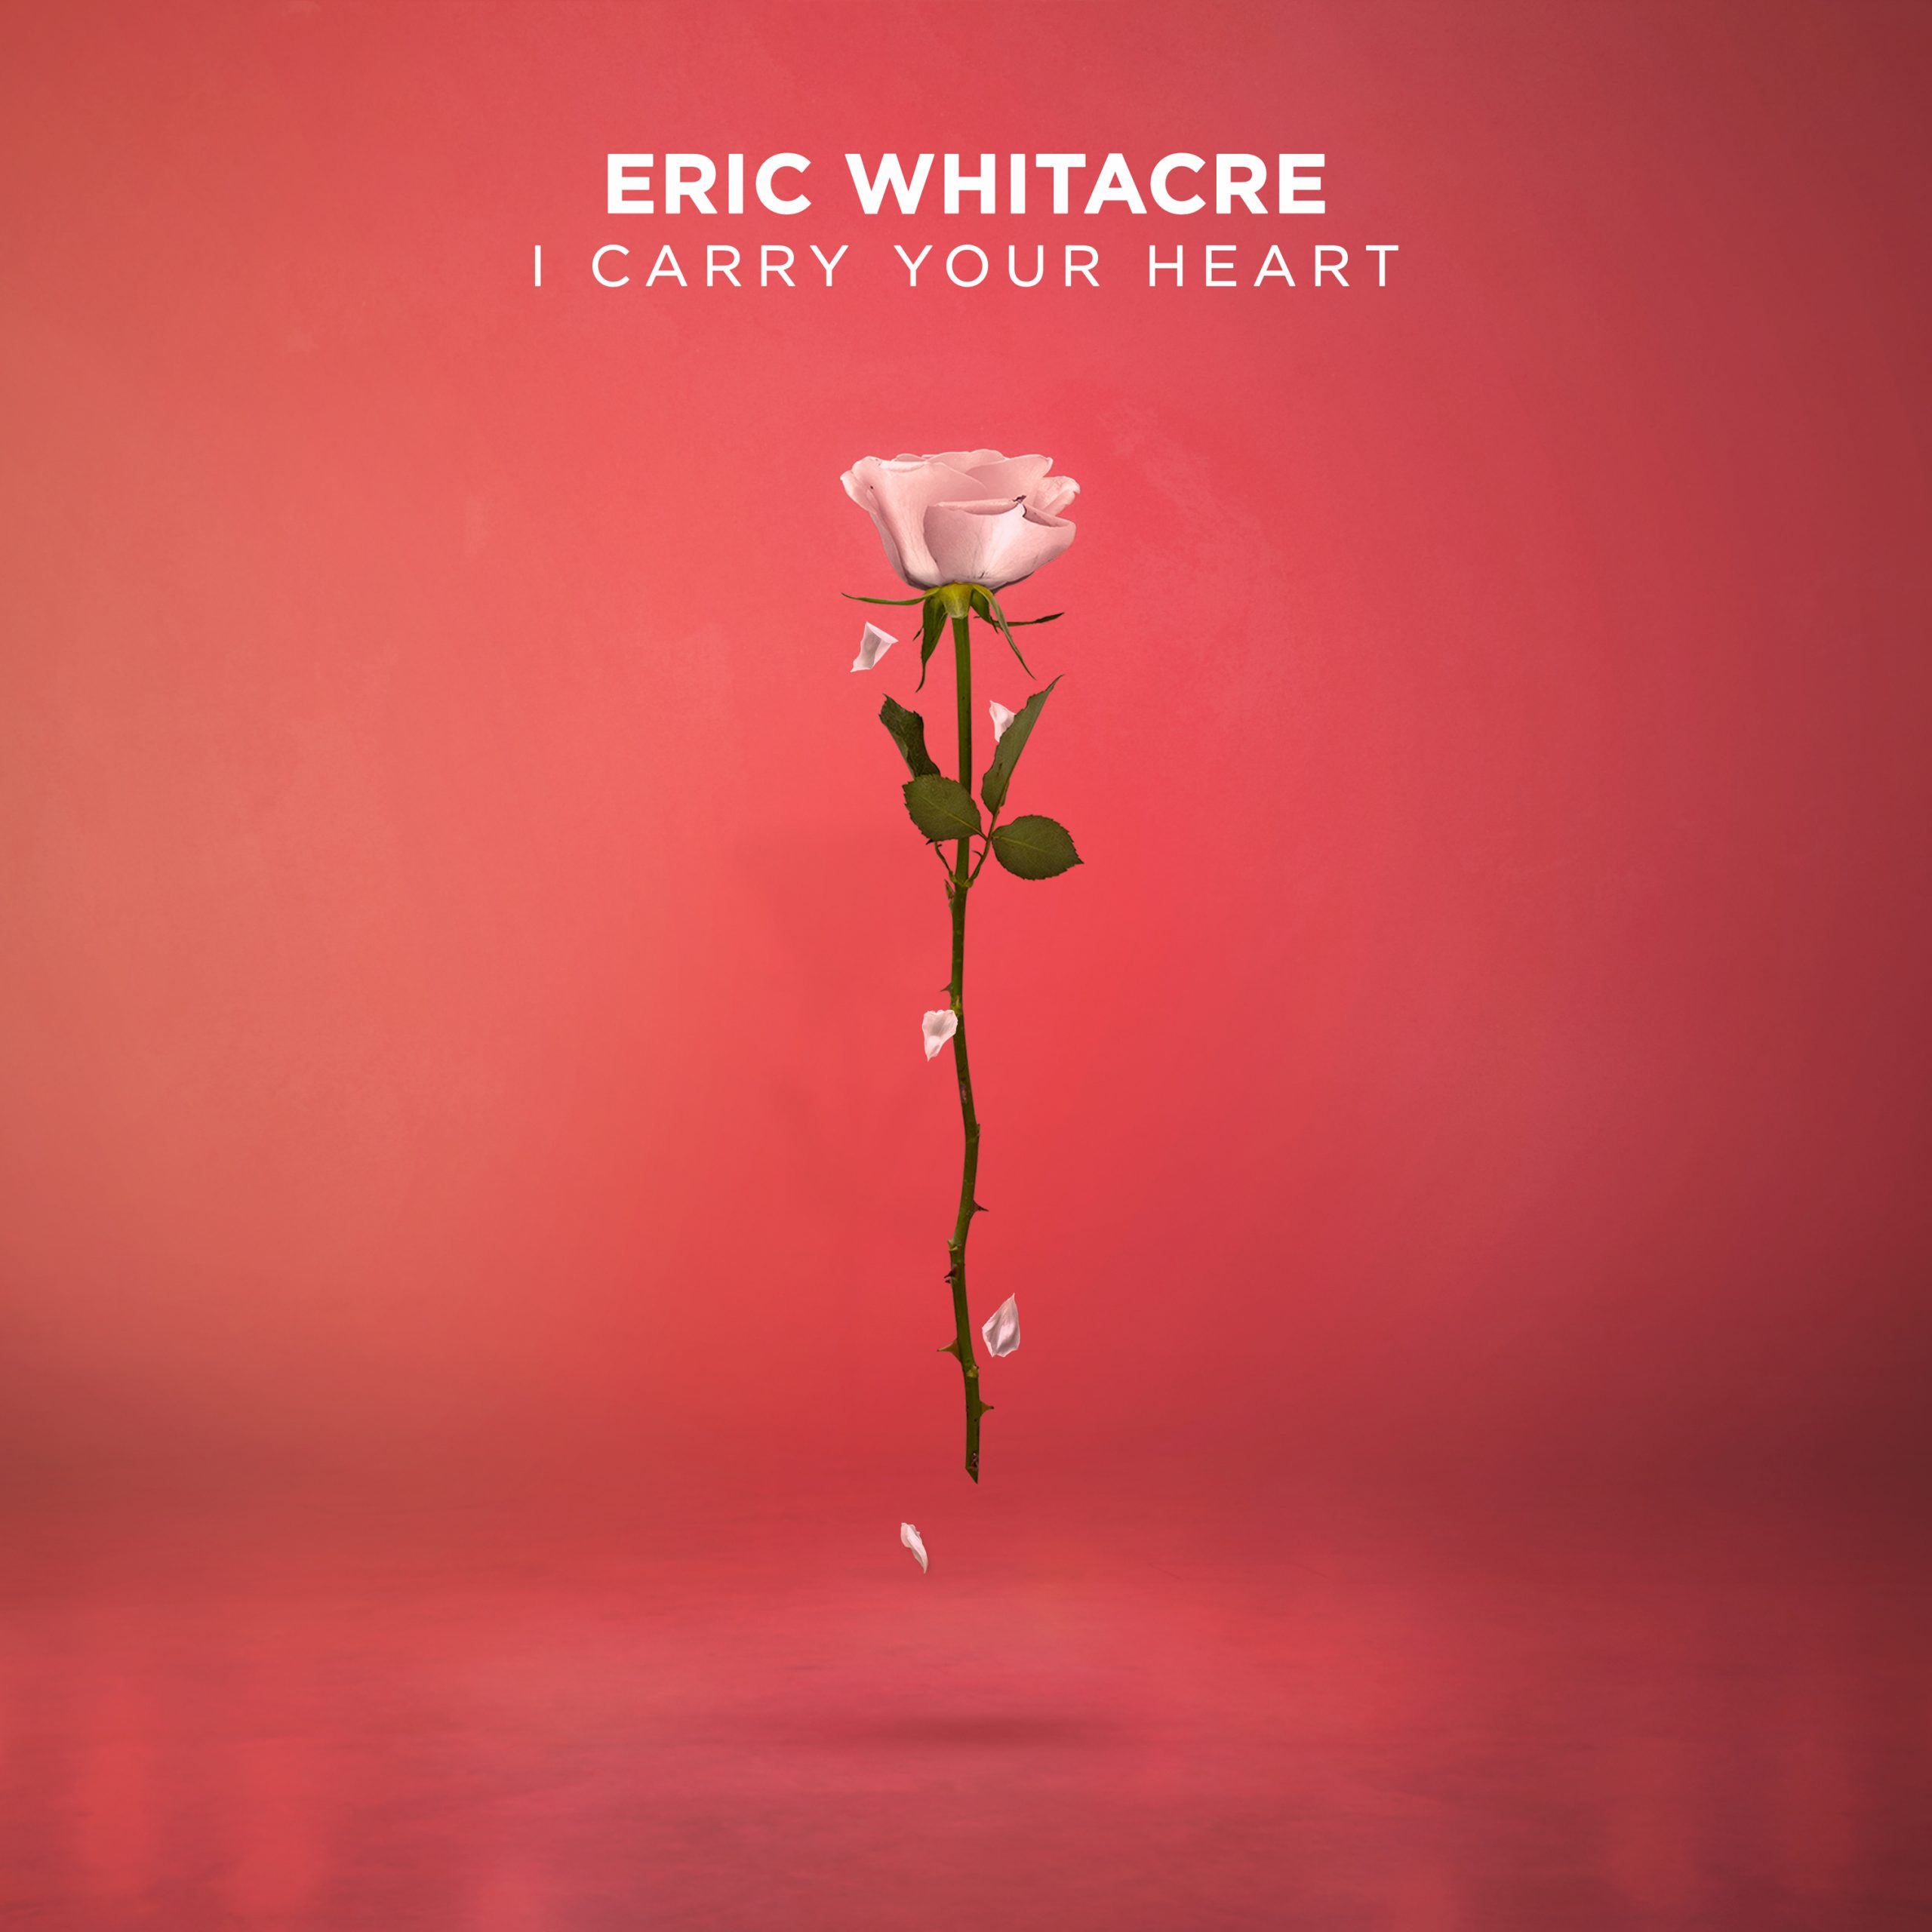 i carry your heart – Recordings – Eric Whitacre